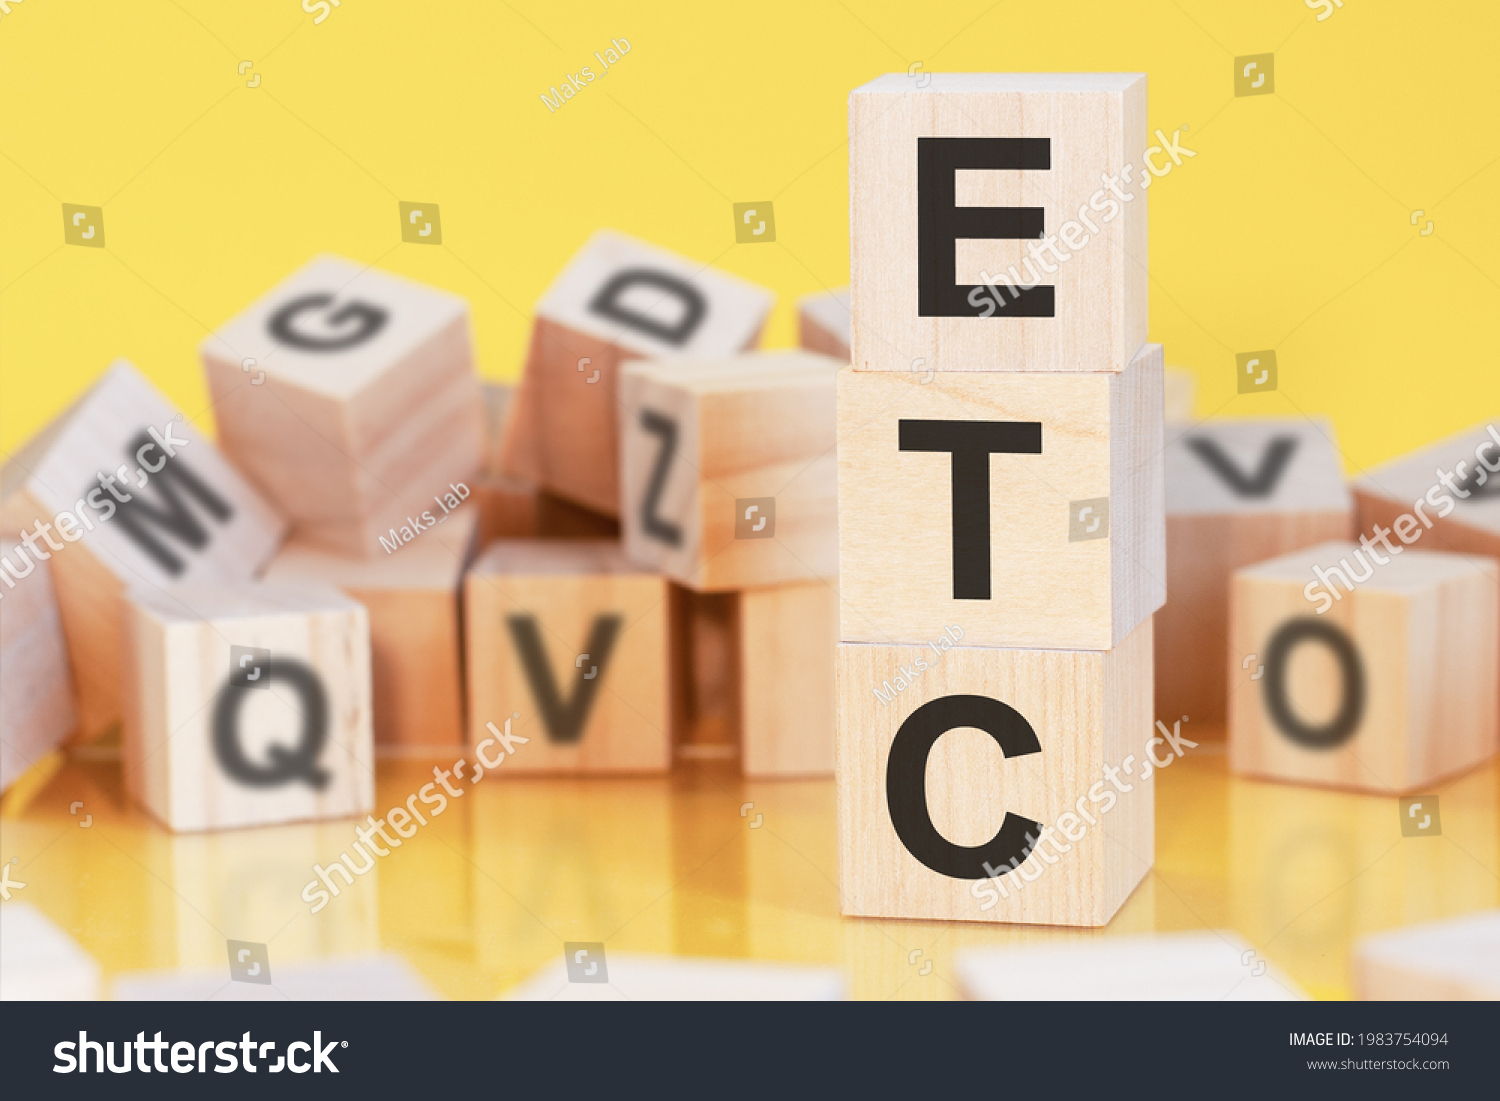 wooden cubes with letters ETC arranged in a vertical pyramid, yellow background, reflection from the surface of the table, business concept. etc - short for electronic trade confirmation #1983754094